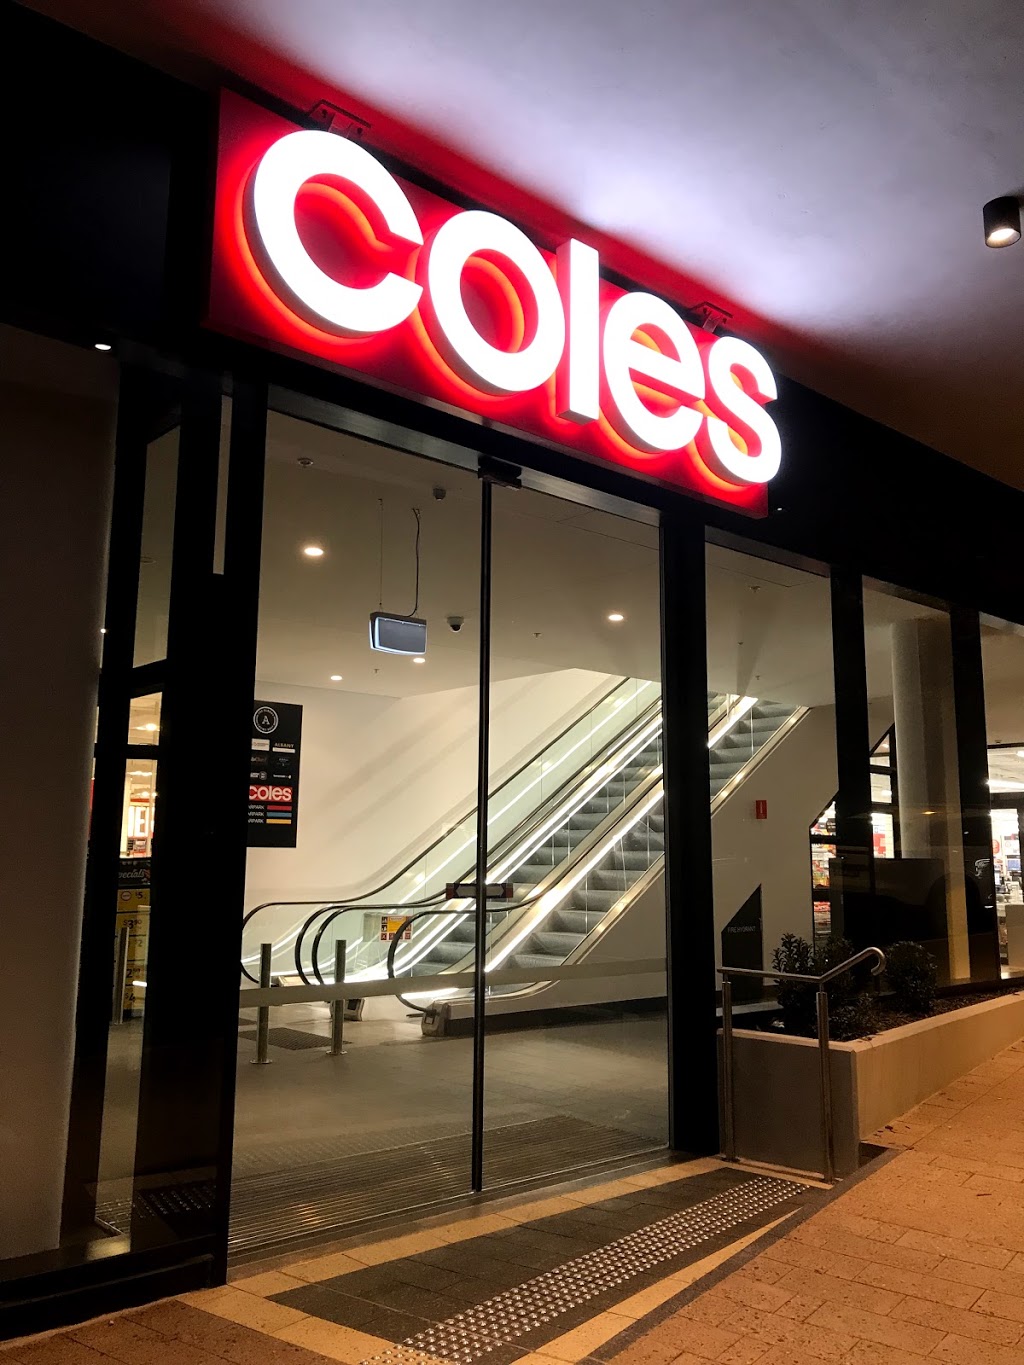 Coles Crows Nest | 101-110 Willoughby Rd, Crows Nest NSW 2065, Australia | Phone: (02) 7955 9100